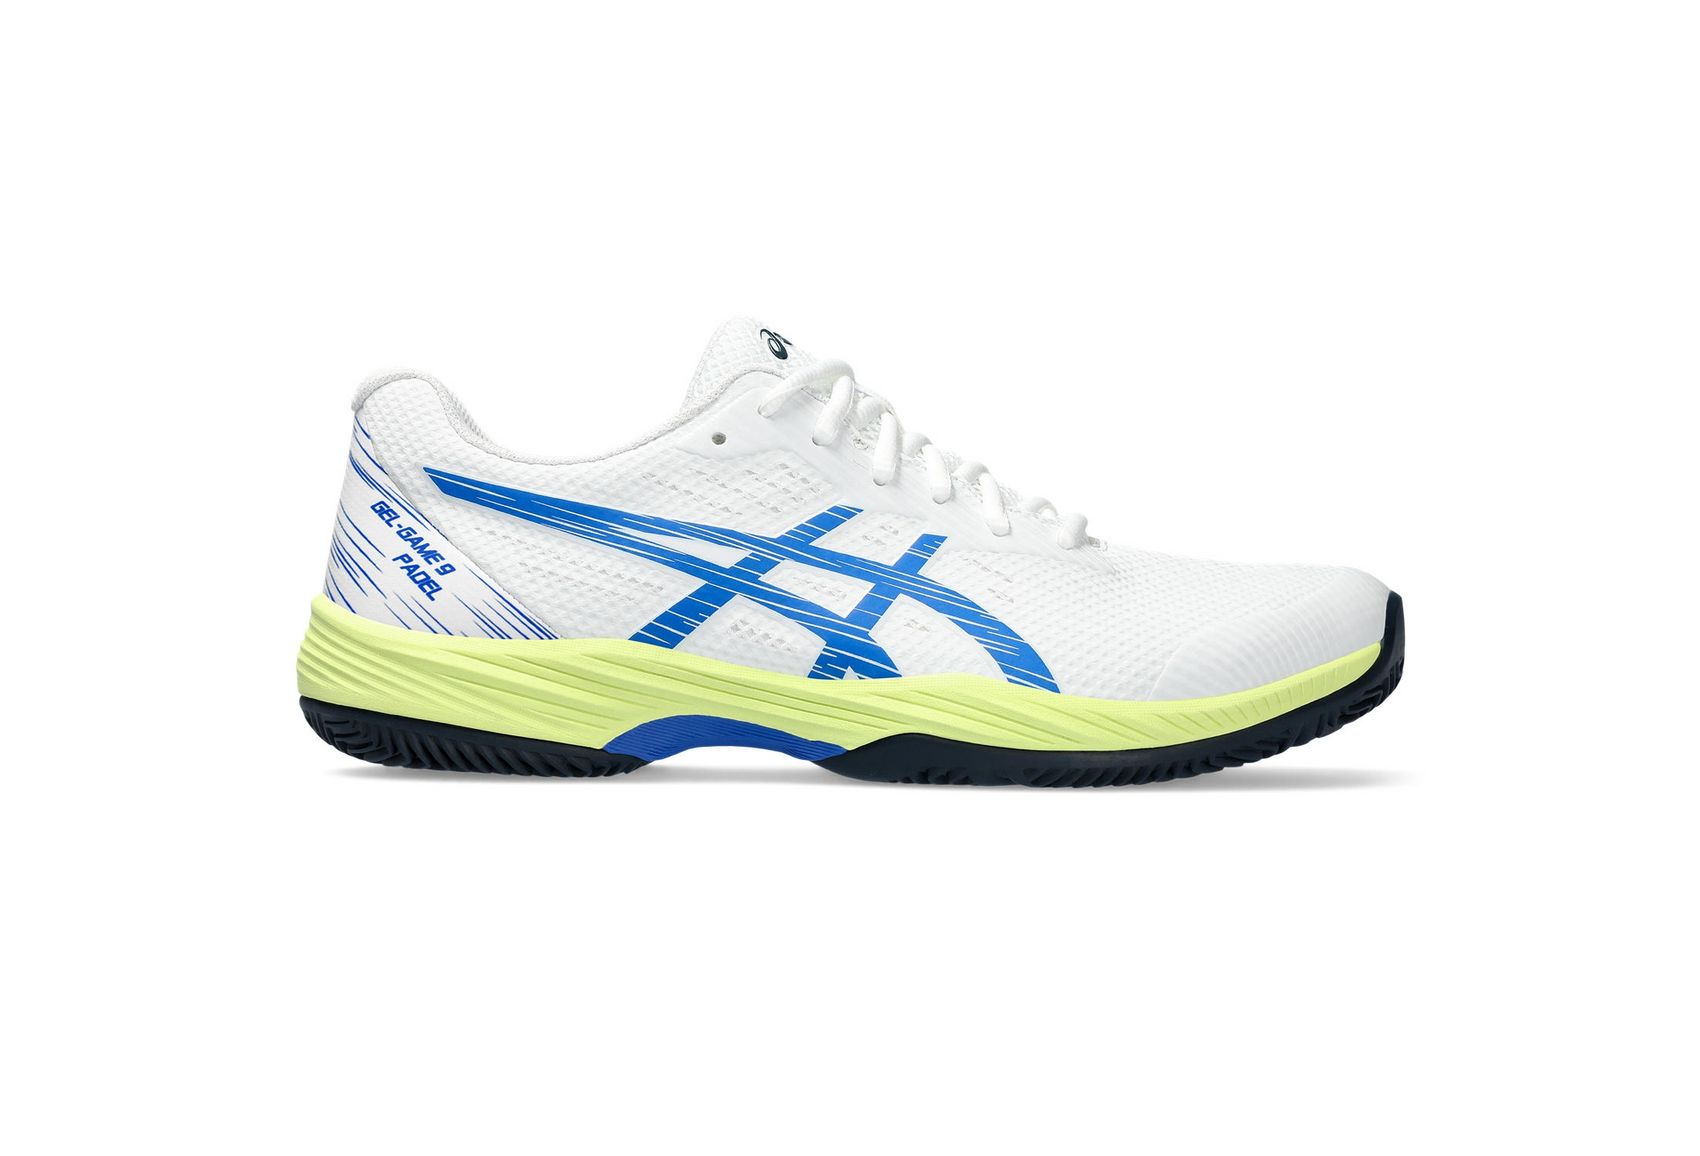 Asics Padel Shoes - The Best Variety